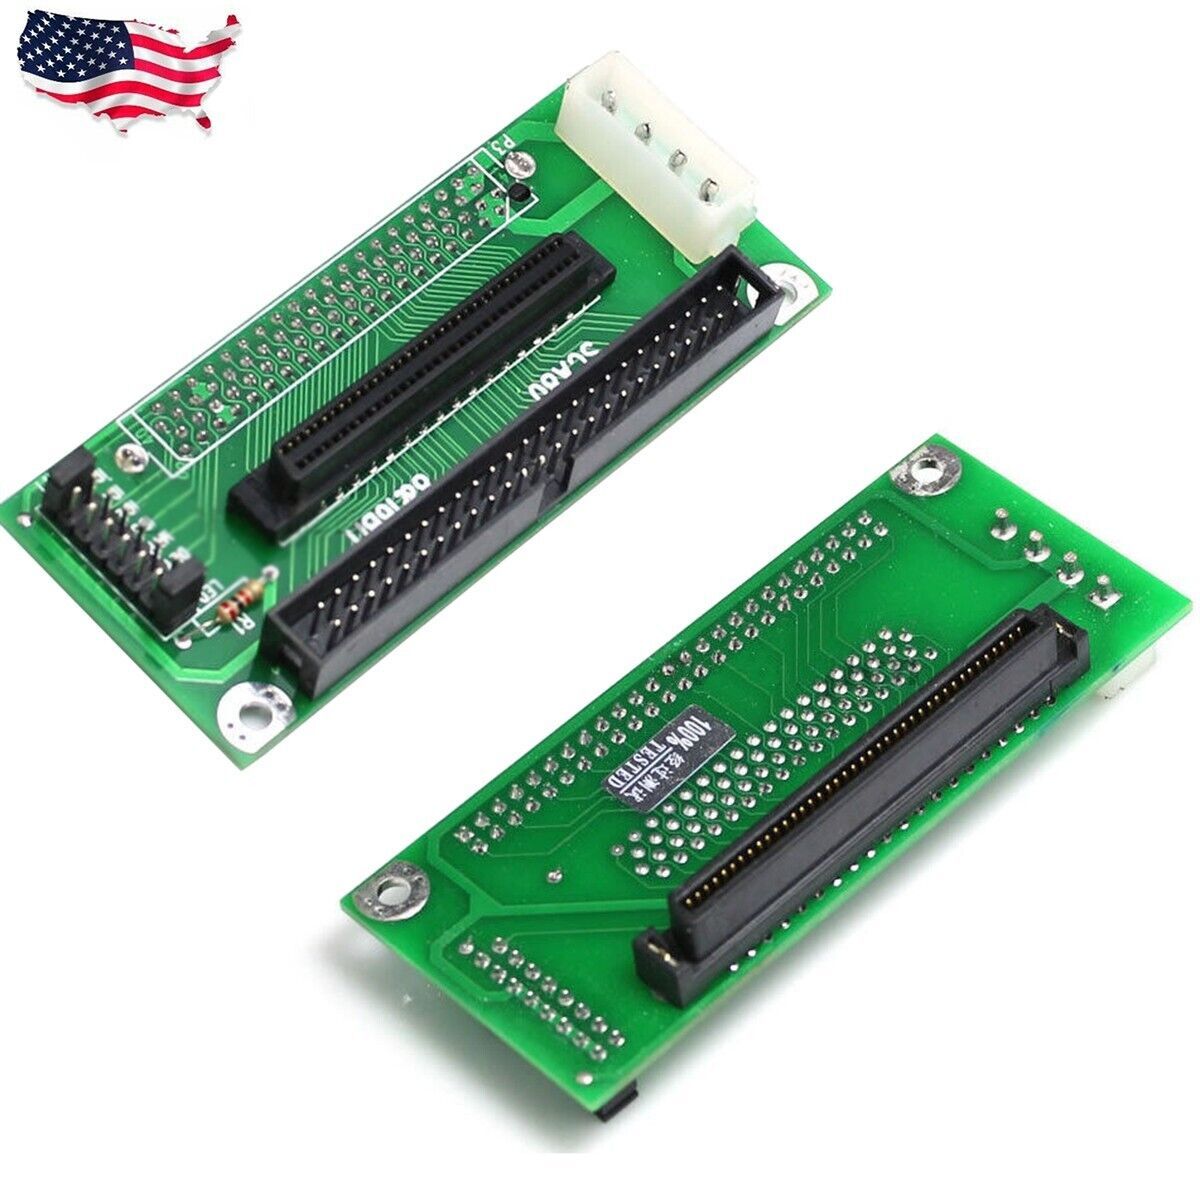 Primary image for Scsi Sca 80-Pin To Scsi 68-Pin/Idc 50-Pin Adapter Scsi 80-68-50 Card